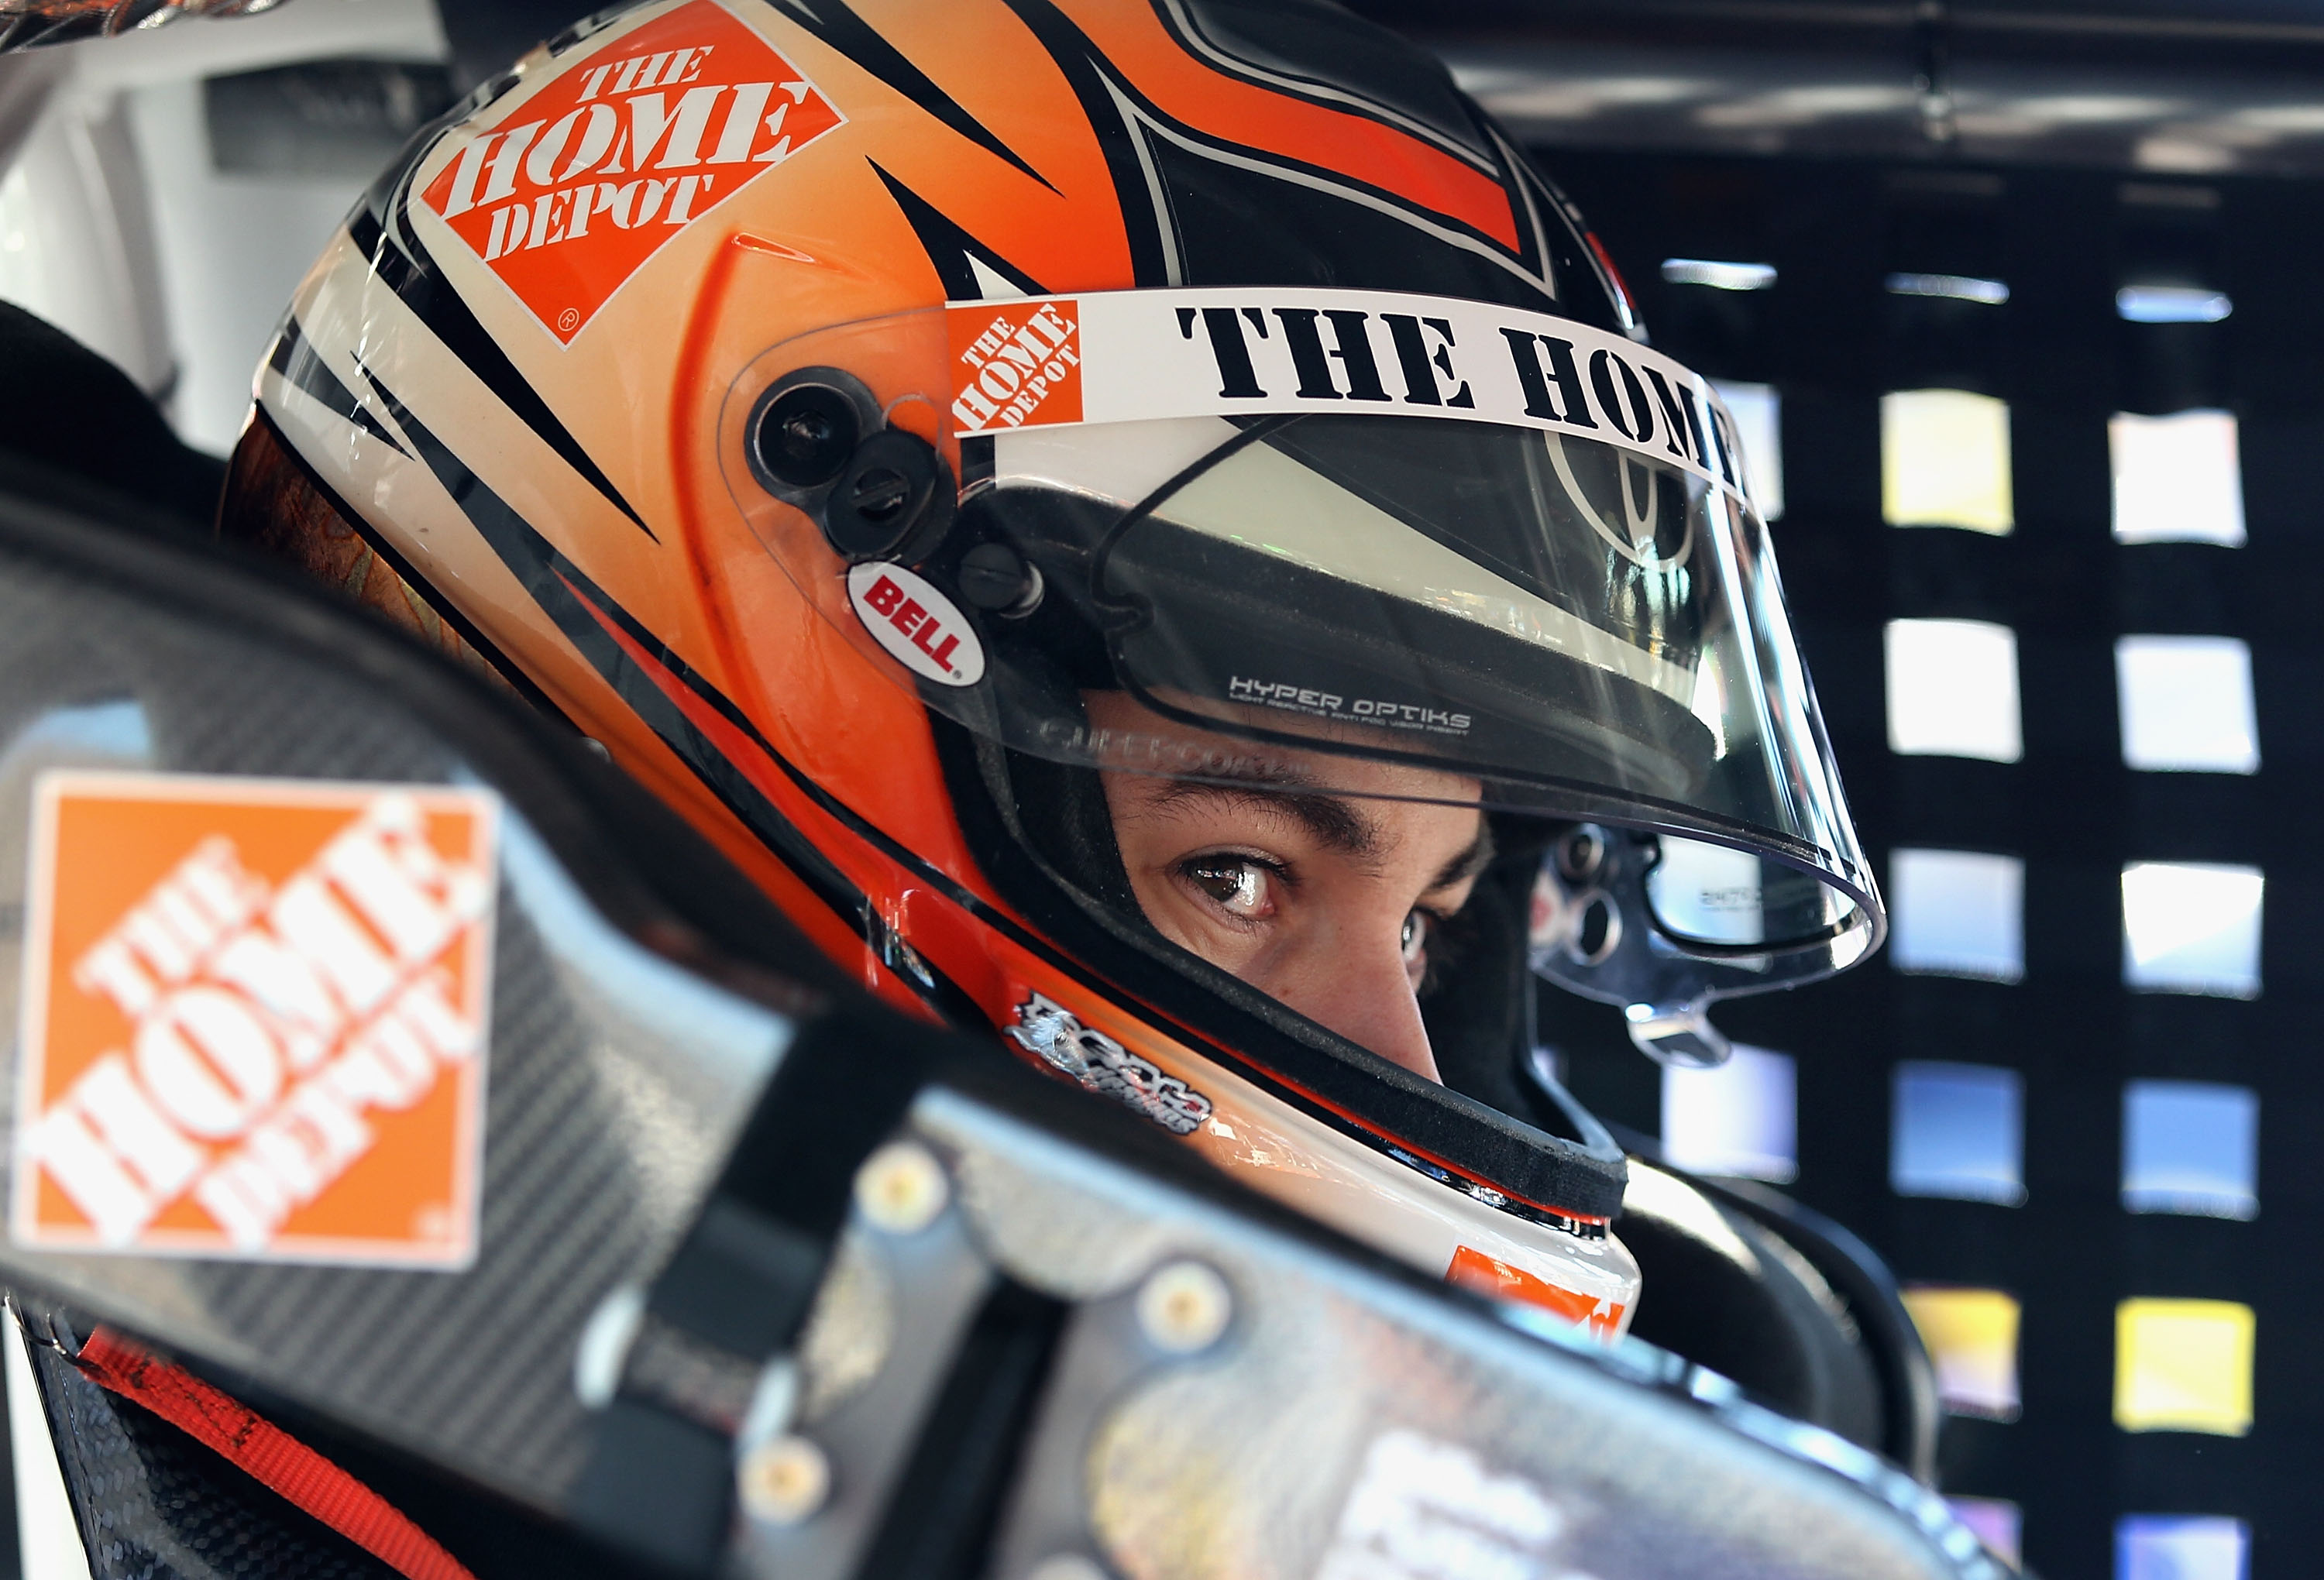 AVONDALE, AZ - NOVEMBER 12:  Joey Logano, driver of the #20 Home Depot Toyota, sits in his car during practice for the NASCAR Sprint Cup Series Kobalt Tools 500 at Phoenix International Raceway on November 12, 2010 in Avondale, Arizona.  (Photo by Christi